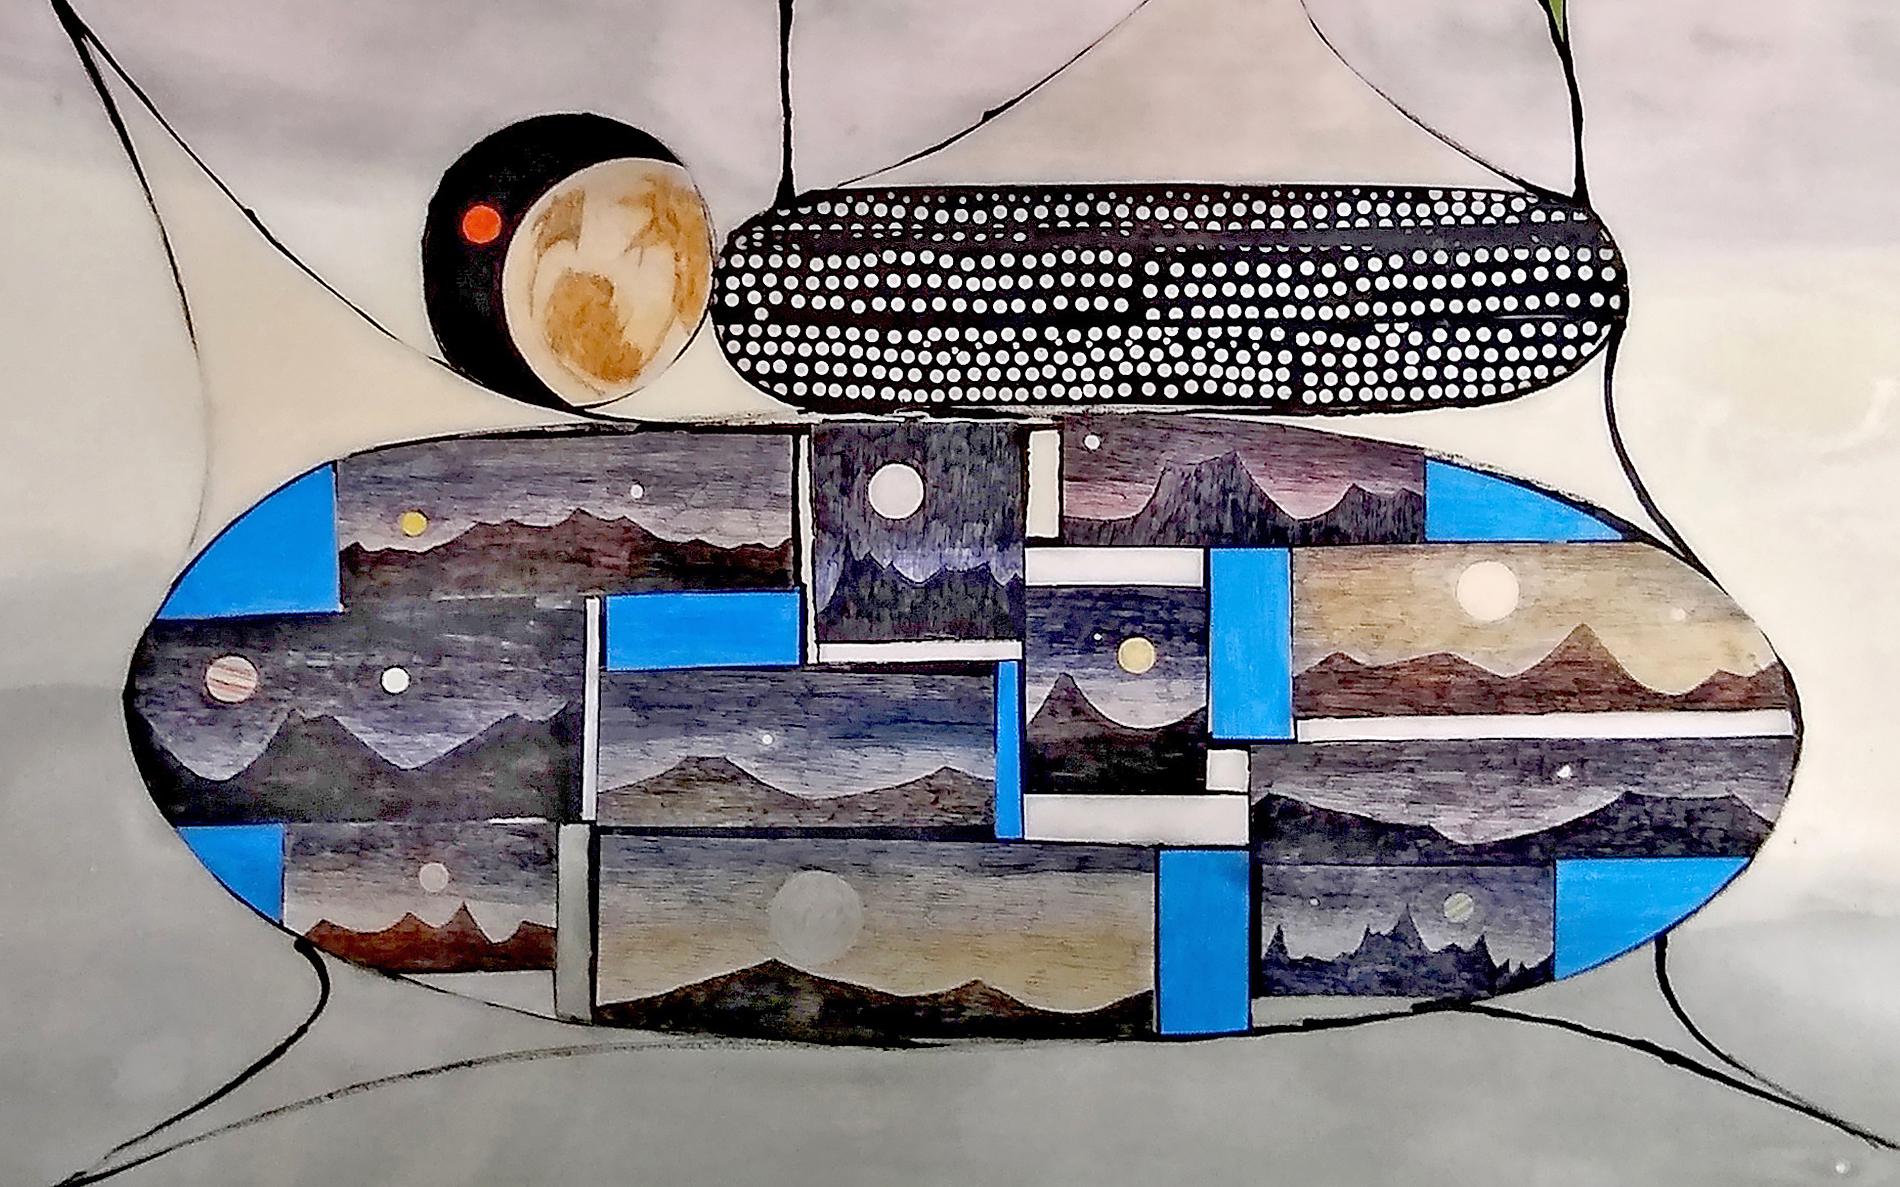 The Super Earth Dilemma 48:1 - Contemporary Mixed Media Art by Russell Crotty